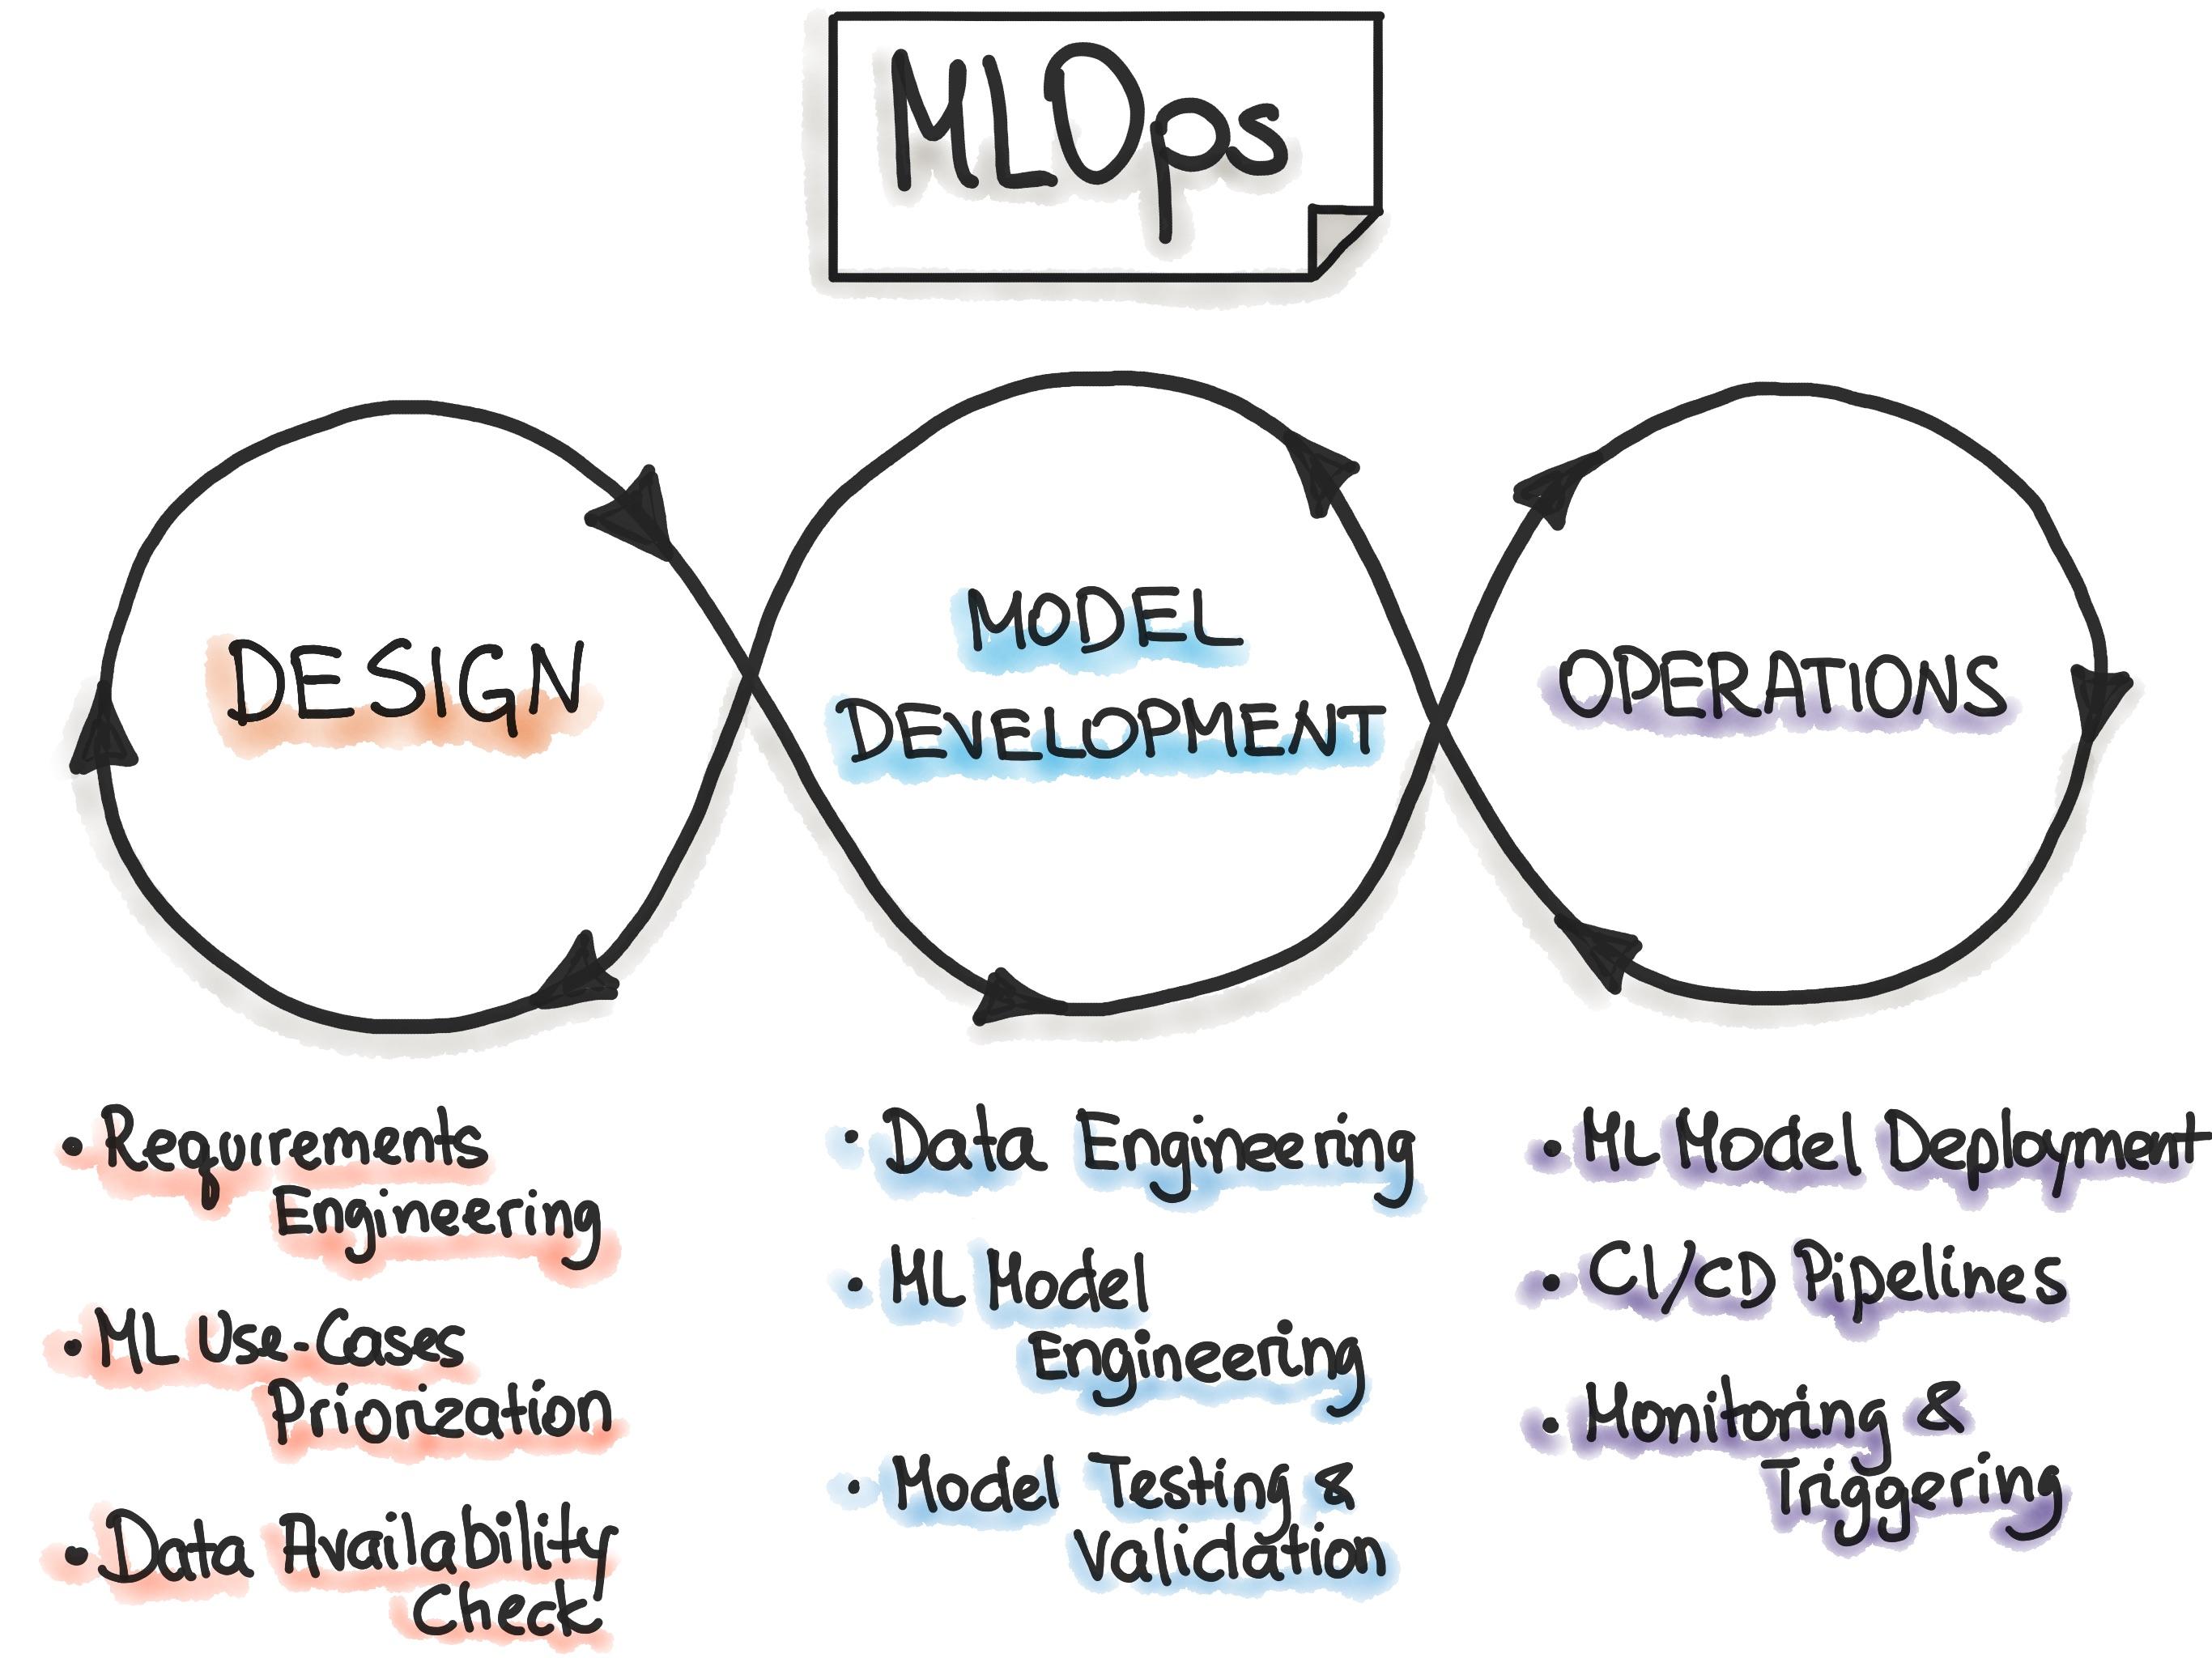 Key Concepts in MLOps